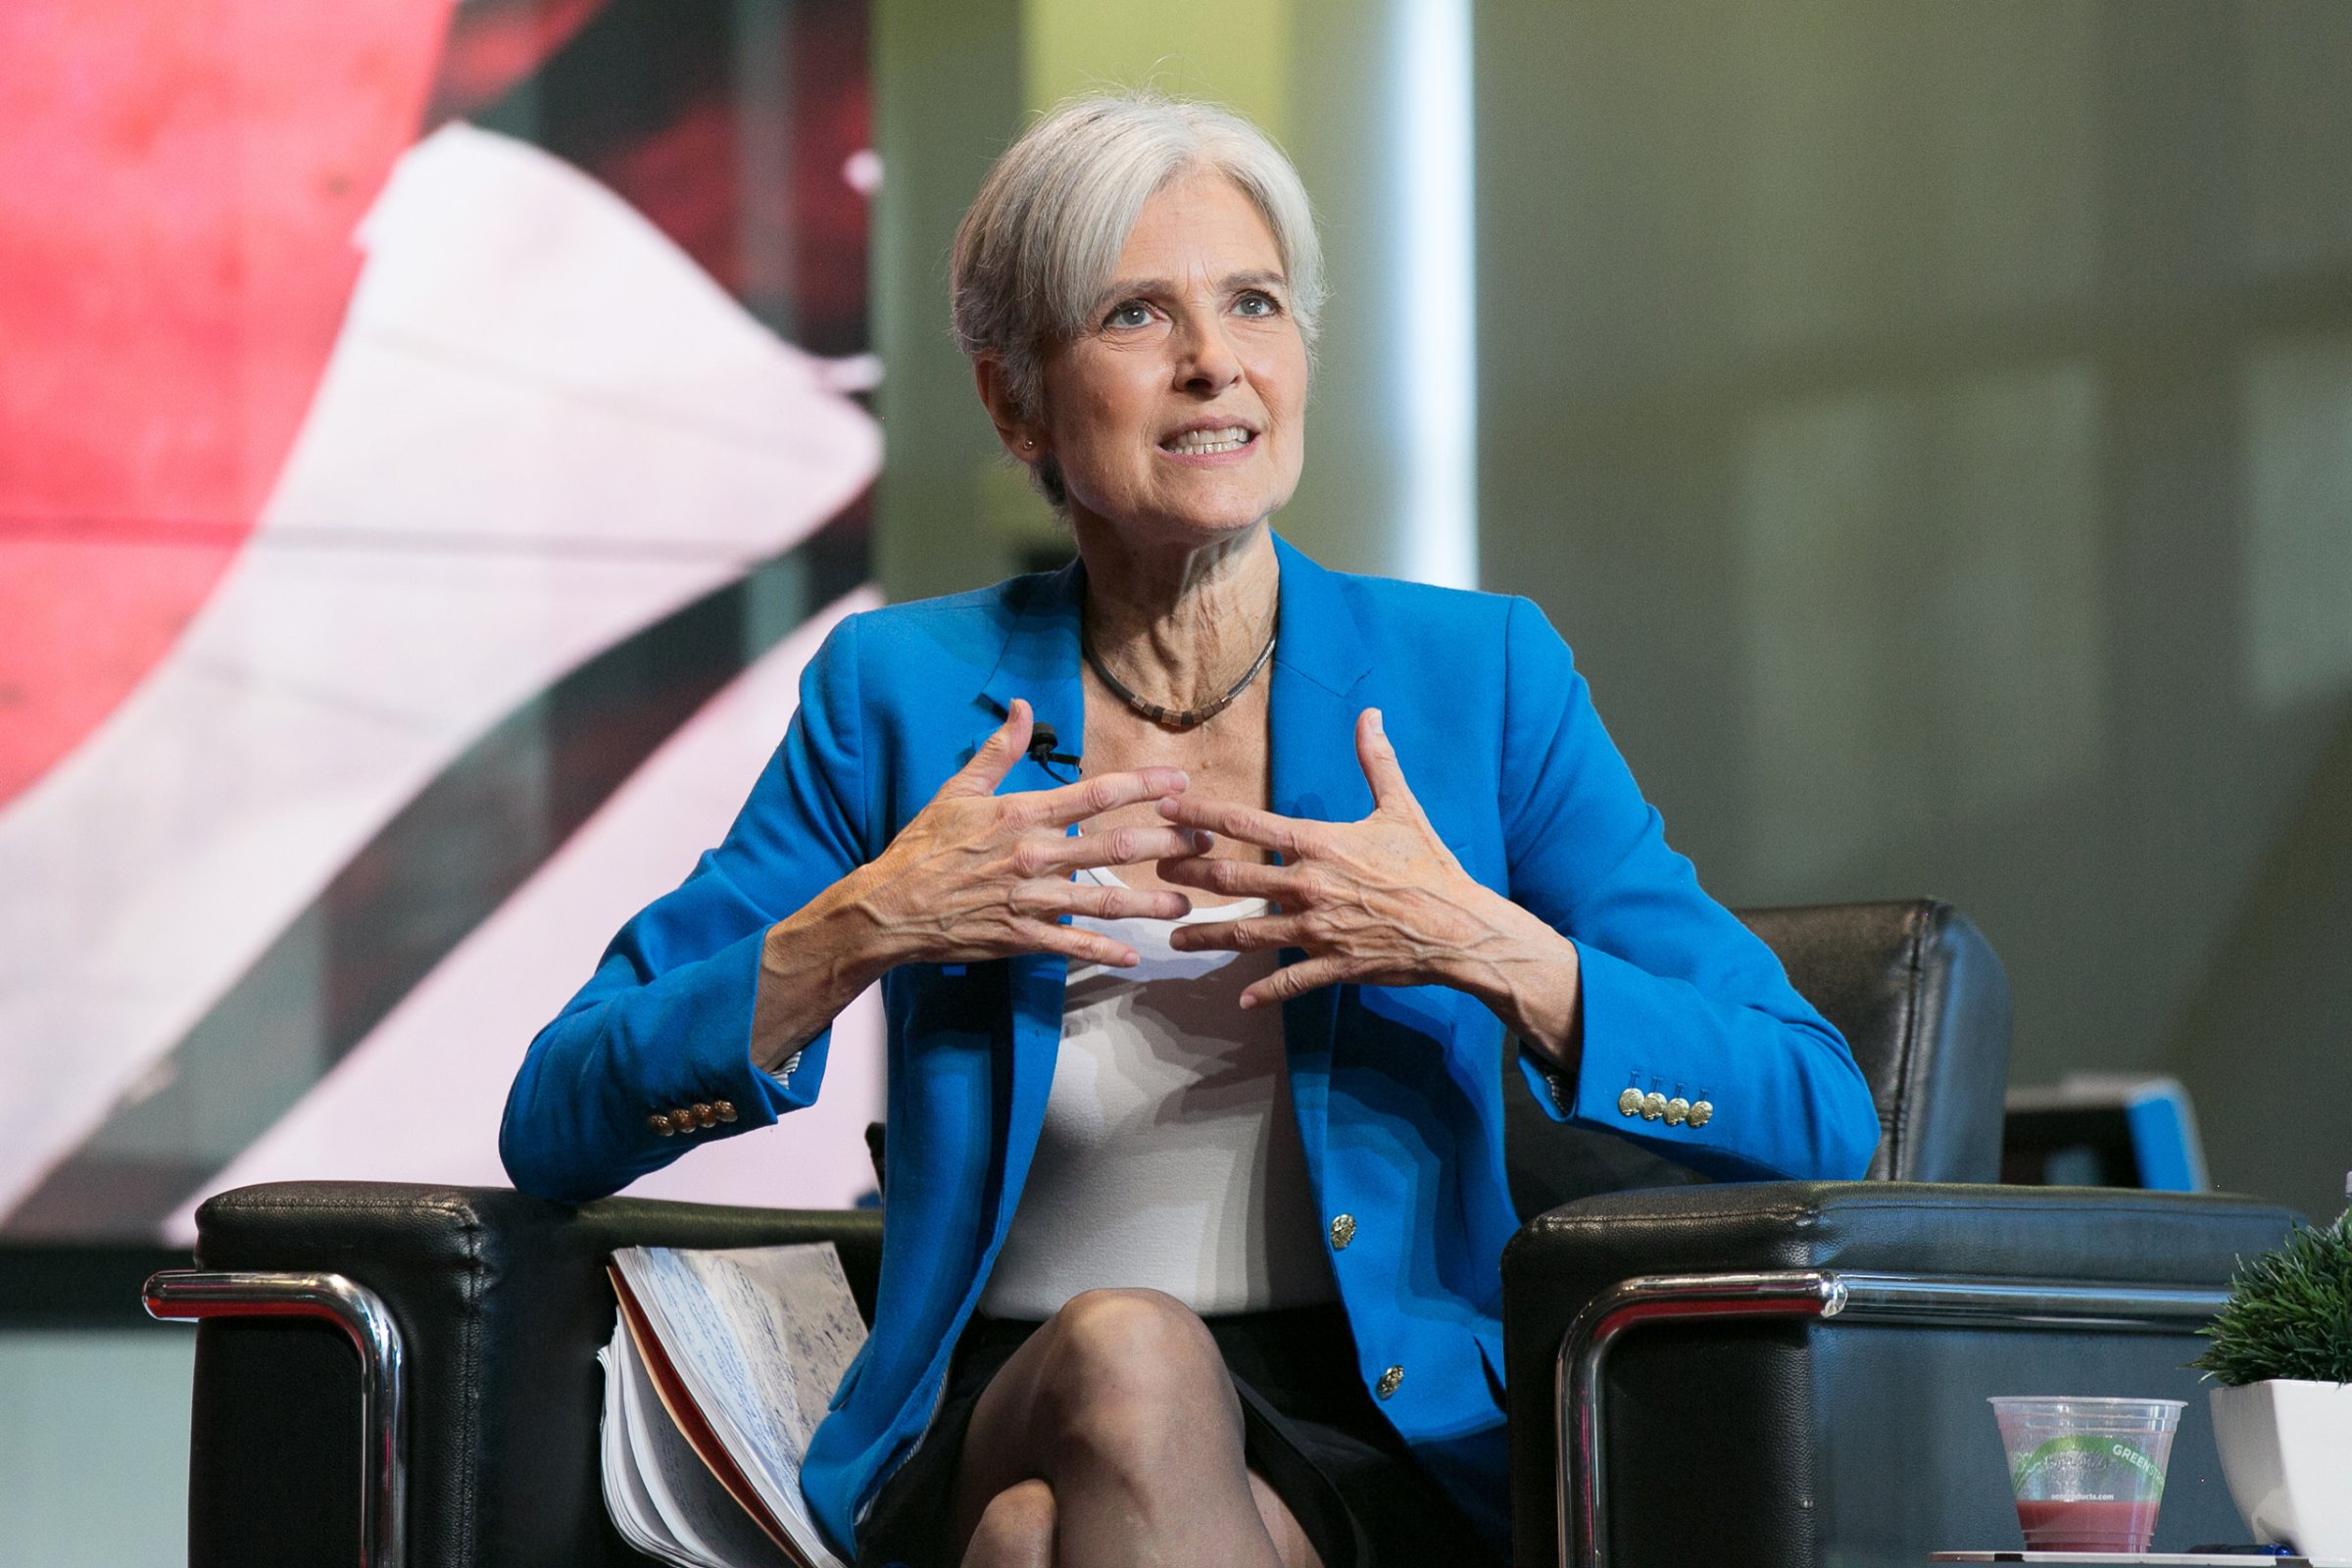 LOS ANGELES, CA - OCTOBER 21: Jill Stein attends the Young Turks Town-Hall WIth Green Party Presidential Candidate Jill Stein at YouTube Space LA on October 21, 2016 in Los Angeles, California. (Photo by Gabriel Olsen/Getty Images)